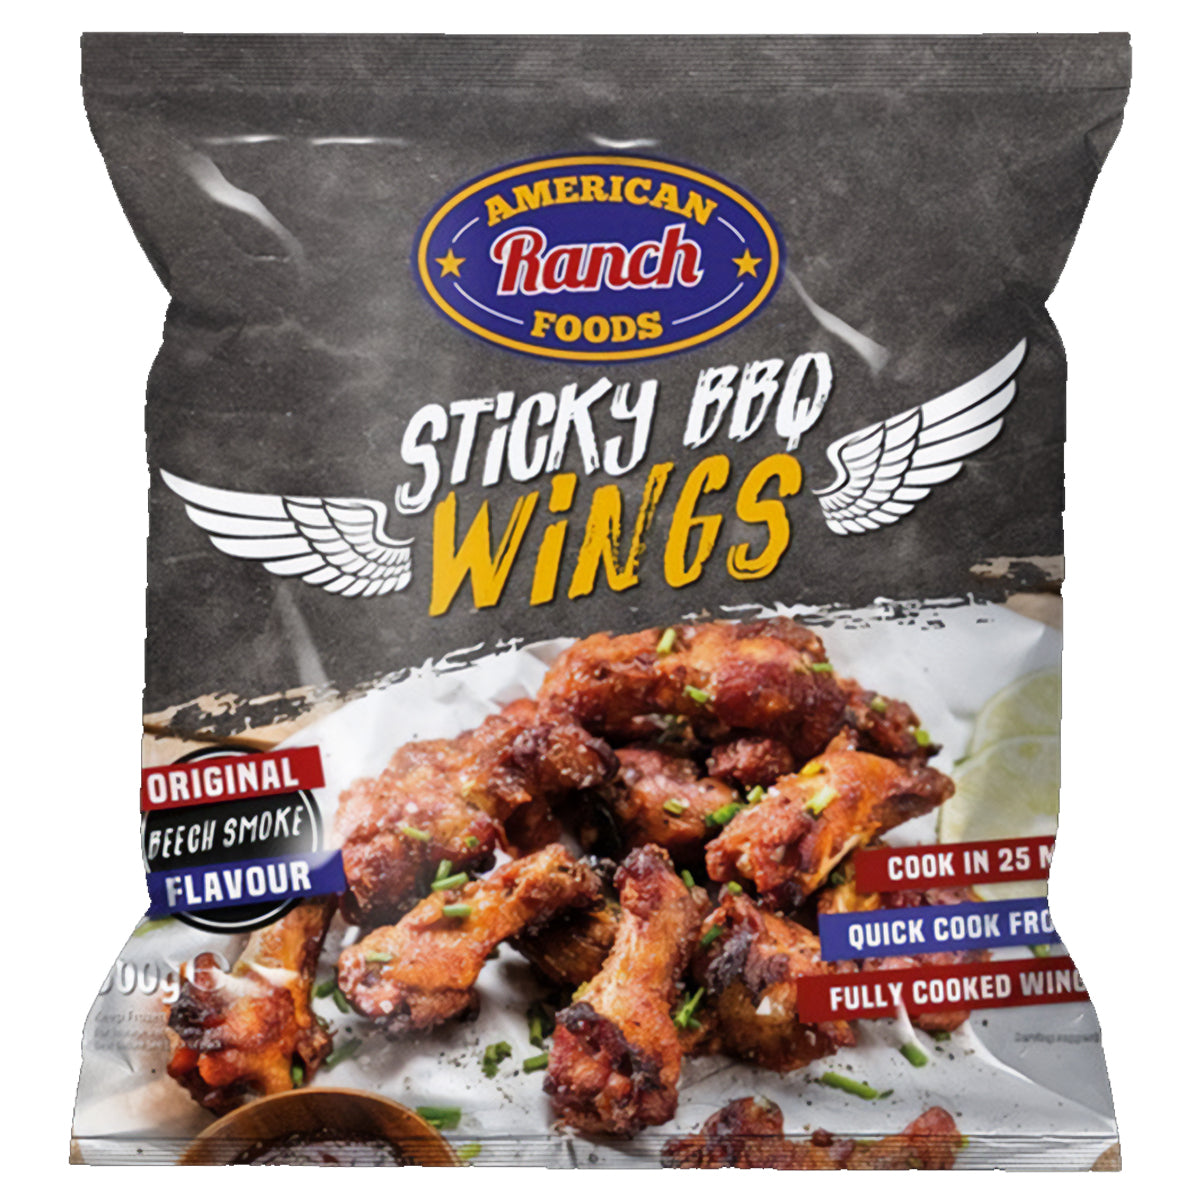 A bag of American Ranch Foods - Sticky BBQ Wings - 500g.